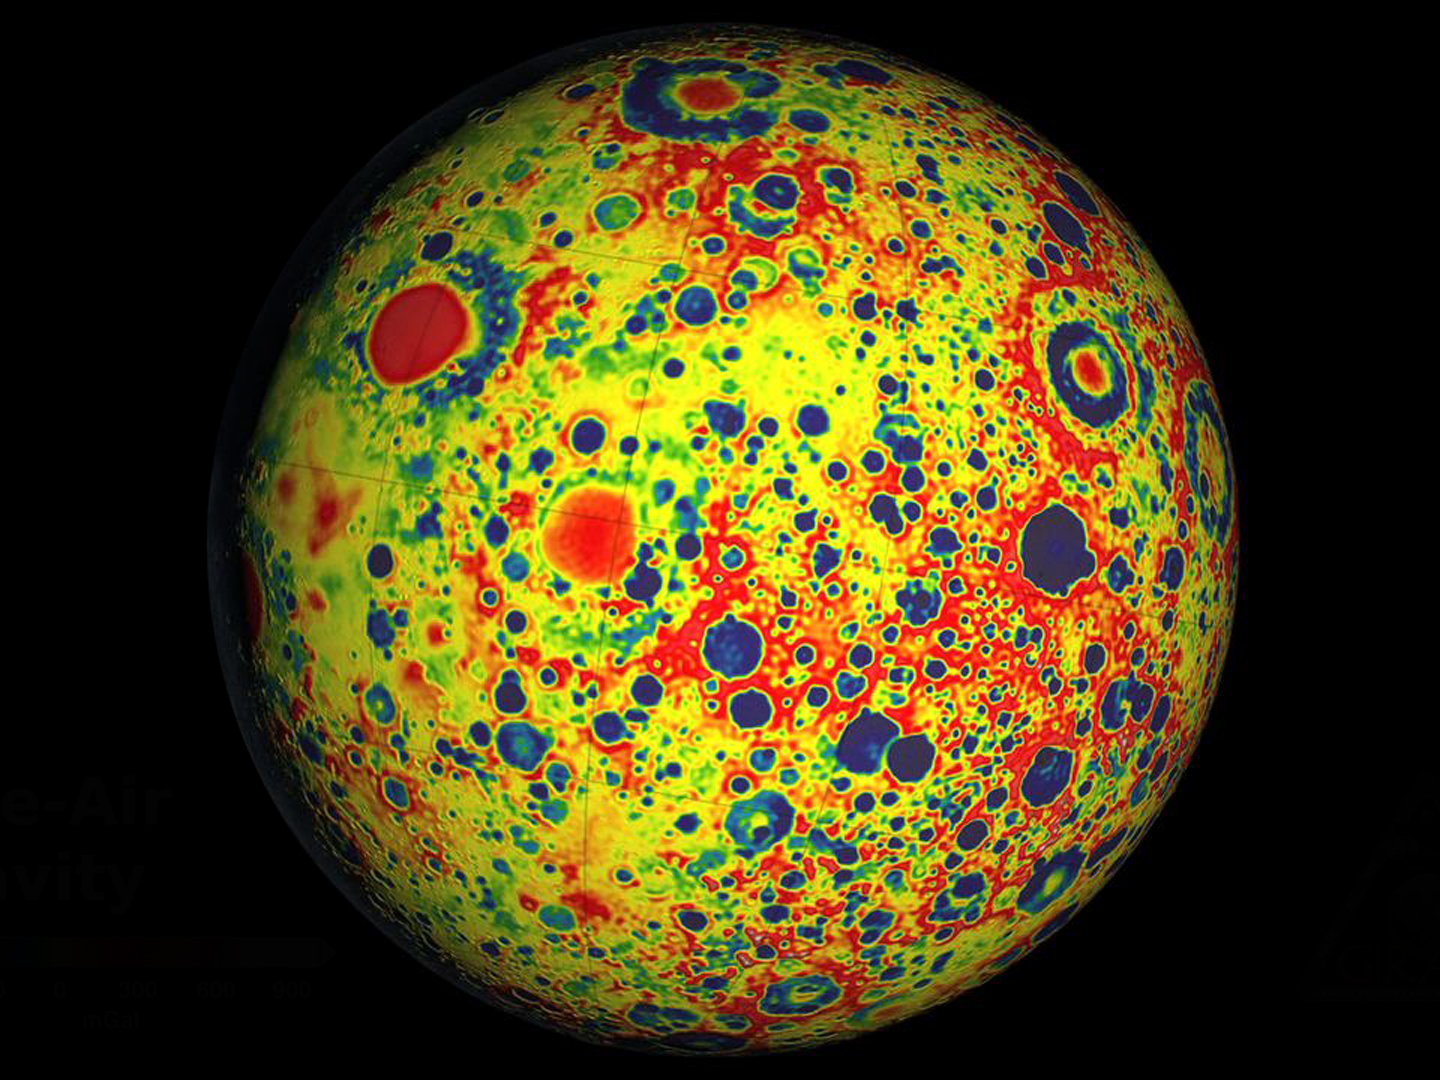 Gravity map of the moon